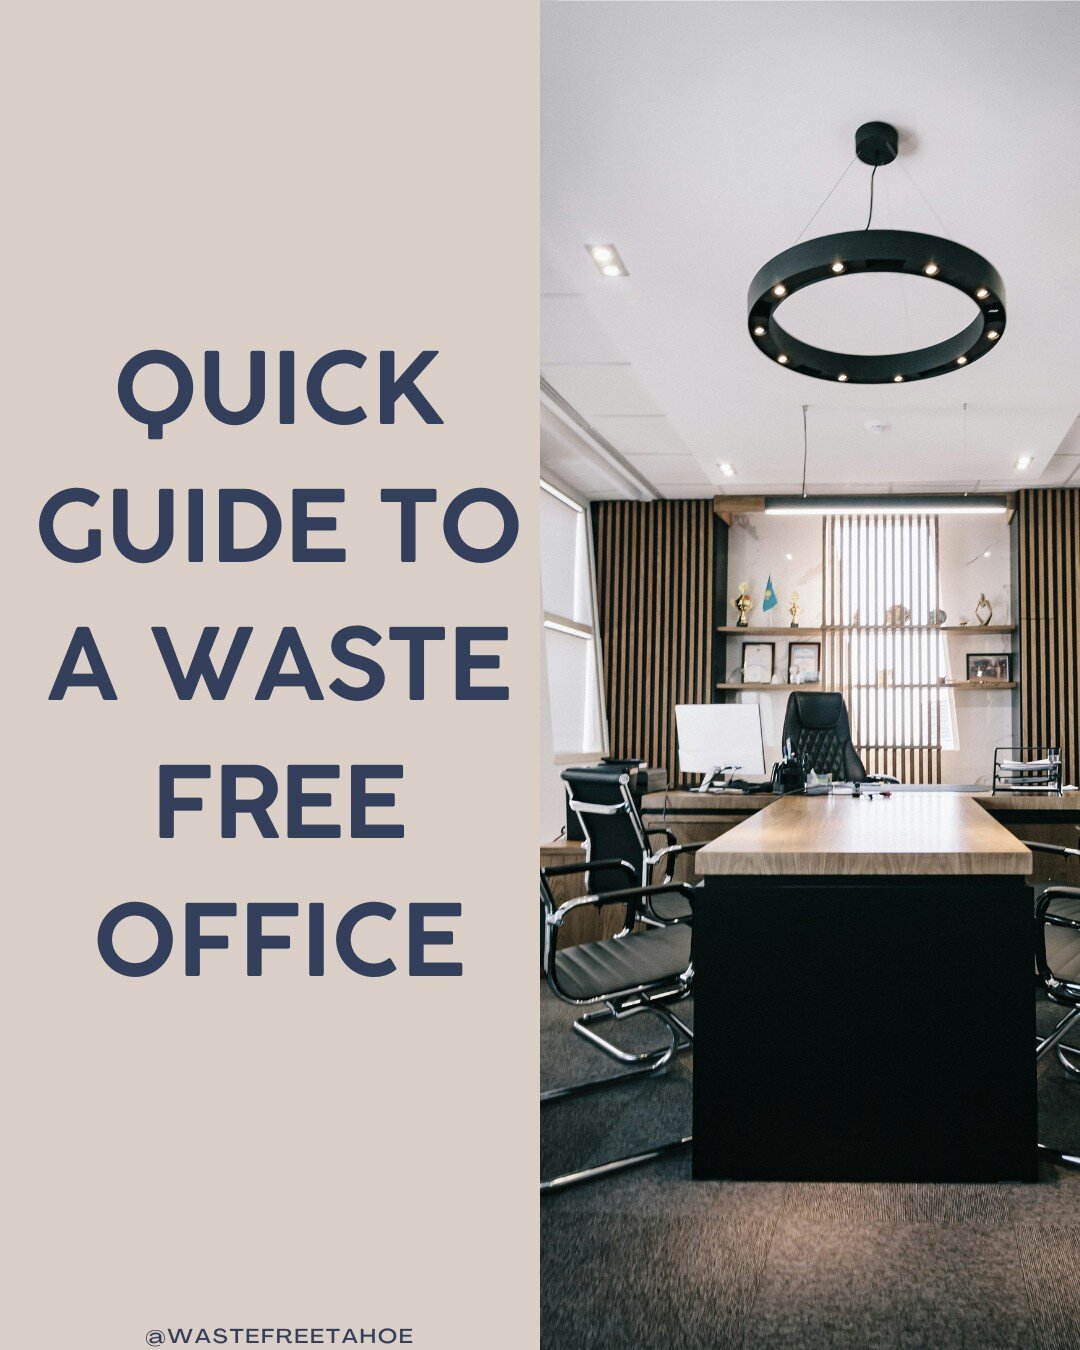 Transforming the workplace, one eco-friendly initiative at a time! 🌿 Join us in embracing sustainable practices to cut down on office waste and make a positive impact 💼 

#wastefree #wastefreeoffice #zerowaste #sustainability #wastefreetahoe